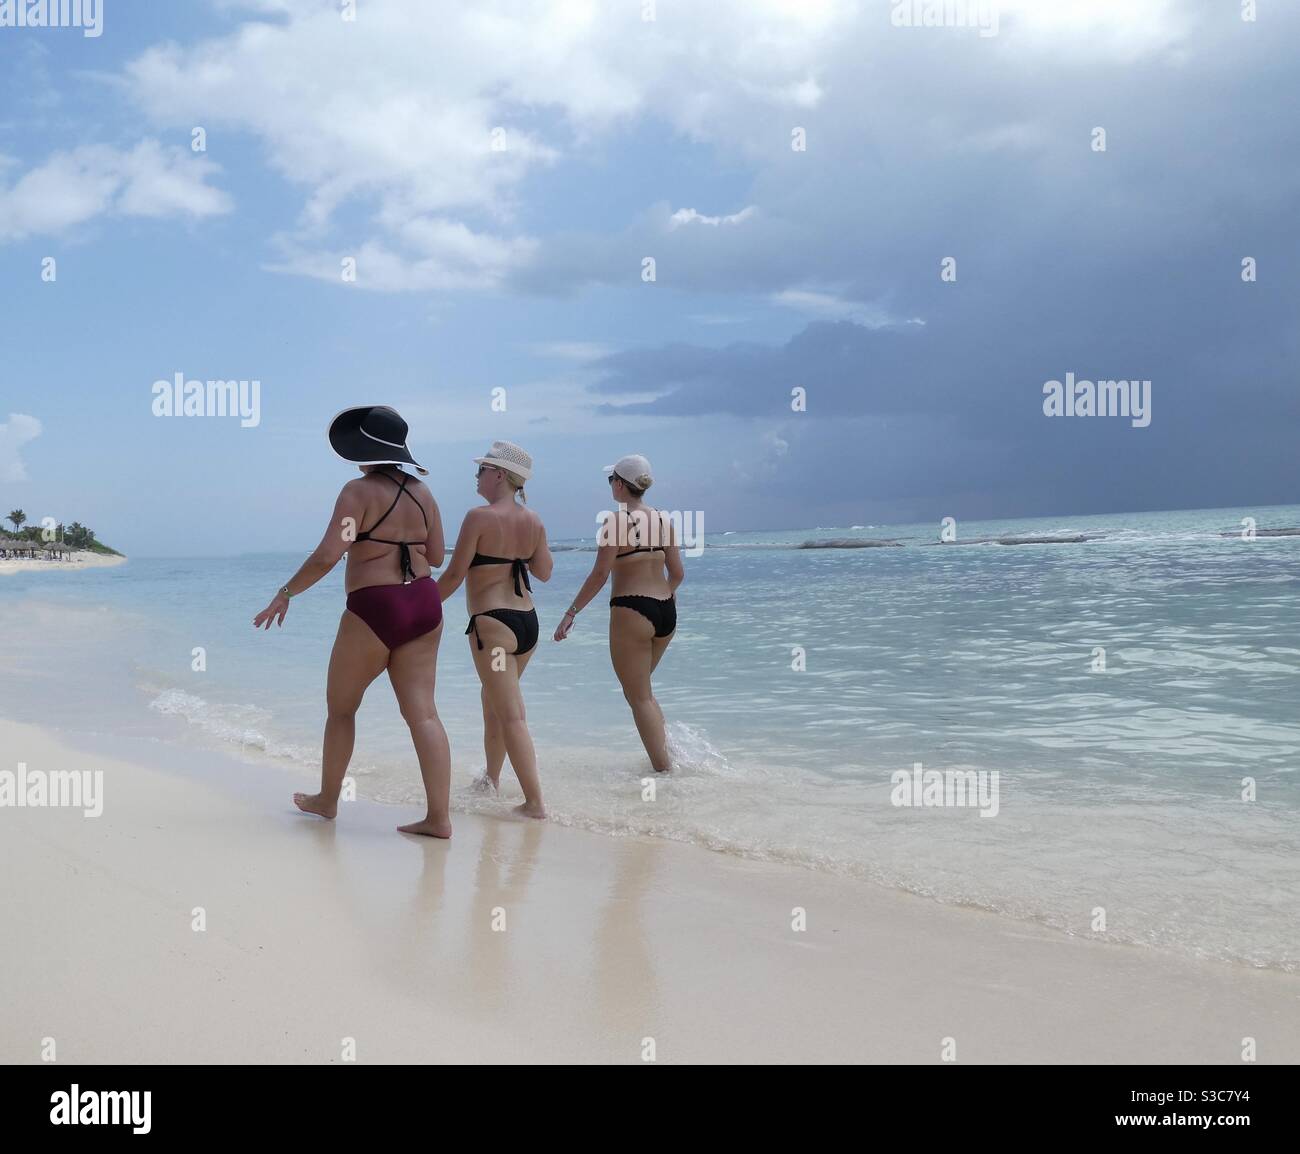 Three women walking along the shoreline at at beach in Mexico. They are all wearing bikinis & sun hats Stock Photo